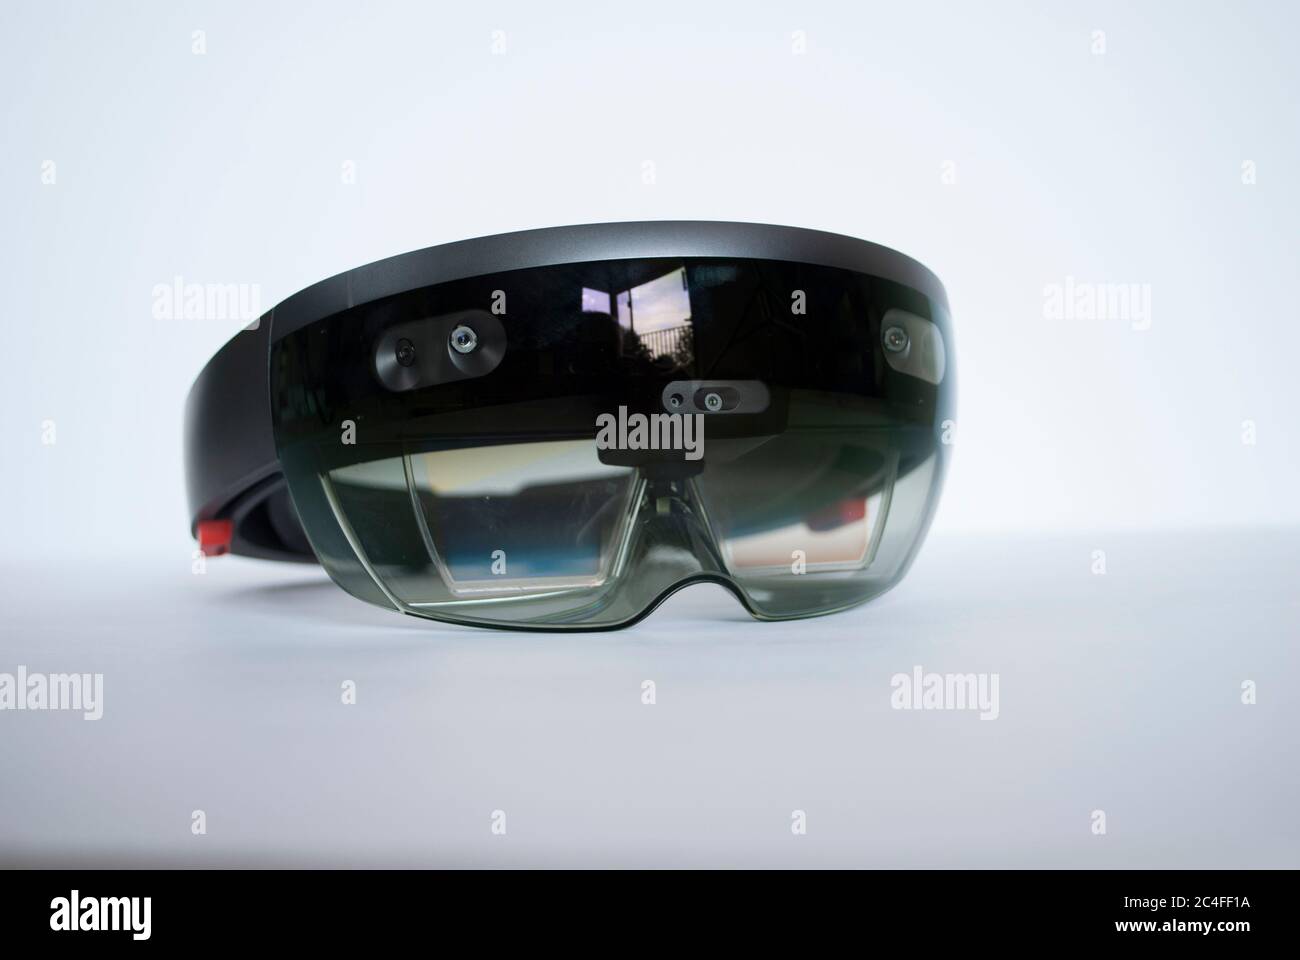 Virtual hololens. Smart glasses isolated on white. Virtual reality headset. Front view. Back view. Mixed reality headset isolated. Stock Photo